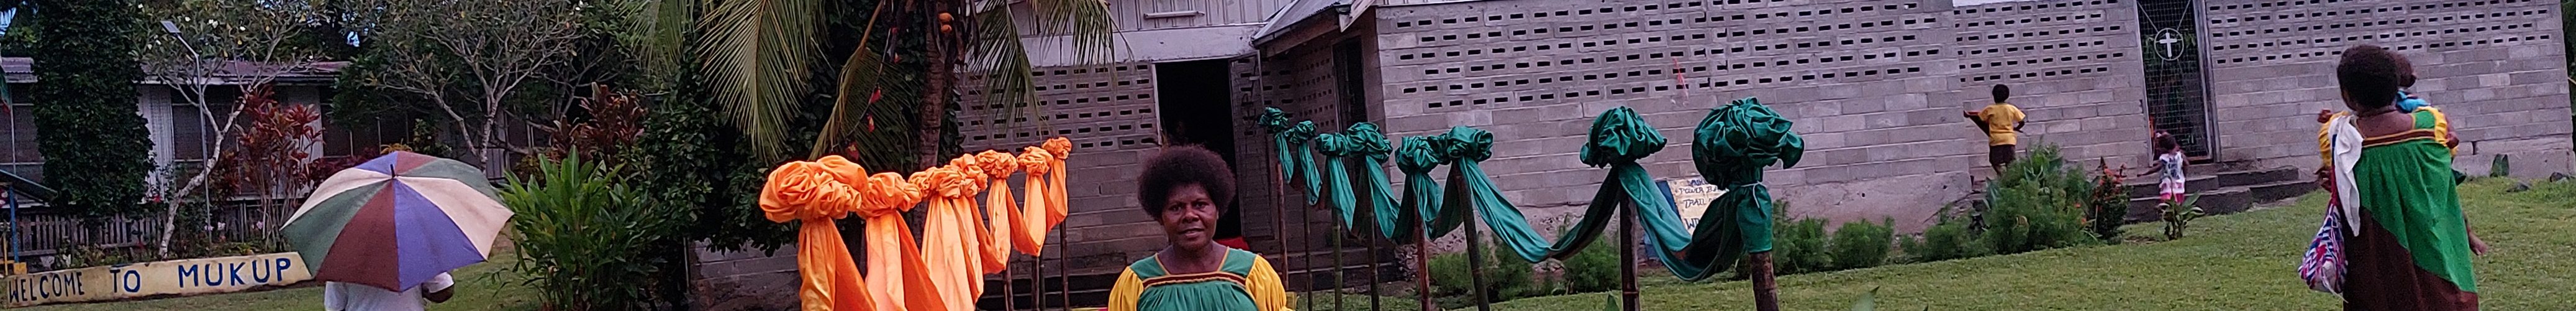 Zechariah's mother, Esther Suii, attending church service at Wingei Mt Zion Local Church, Papua New Guinea